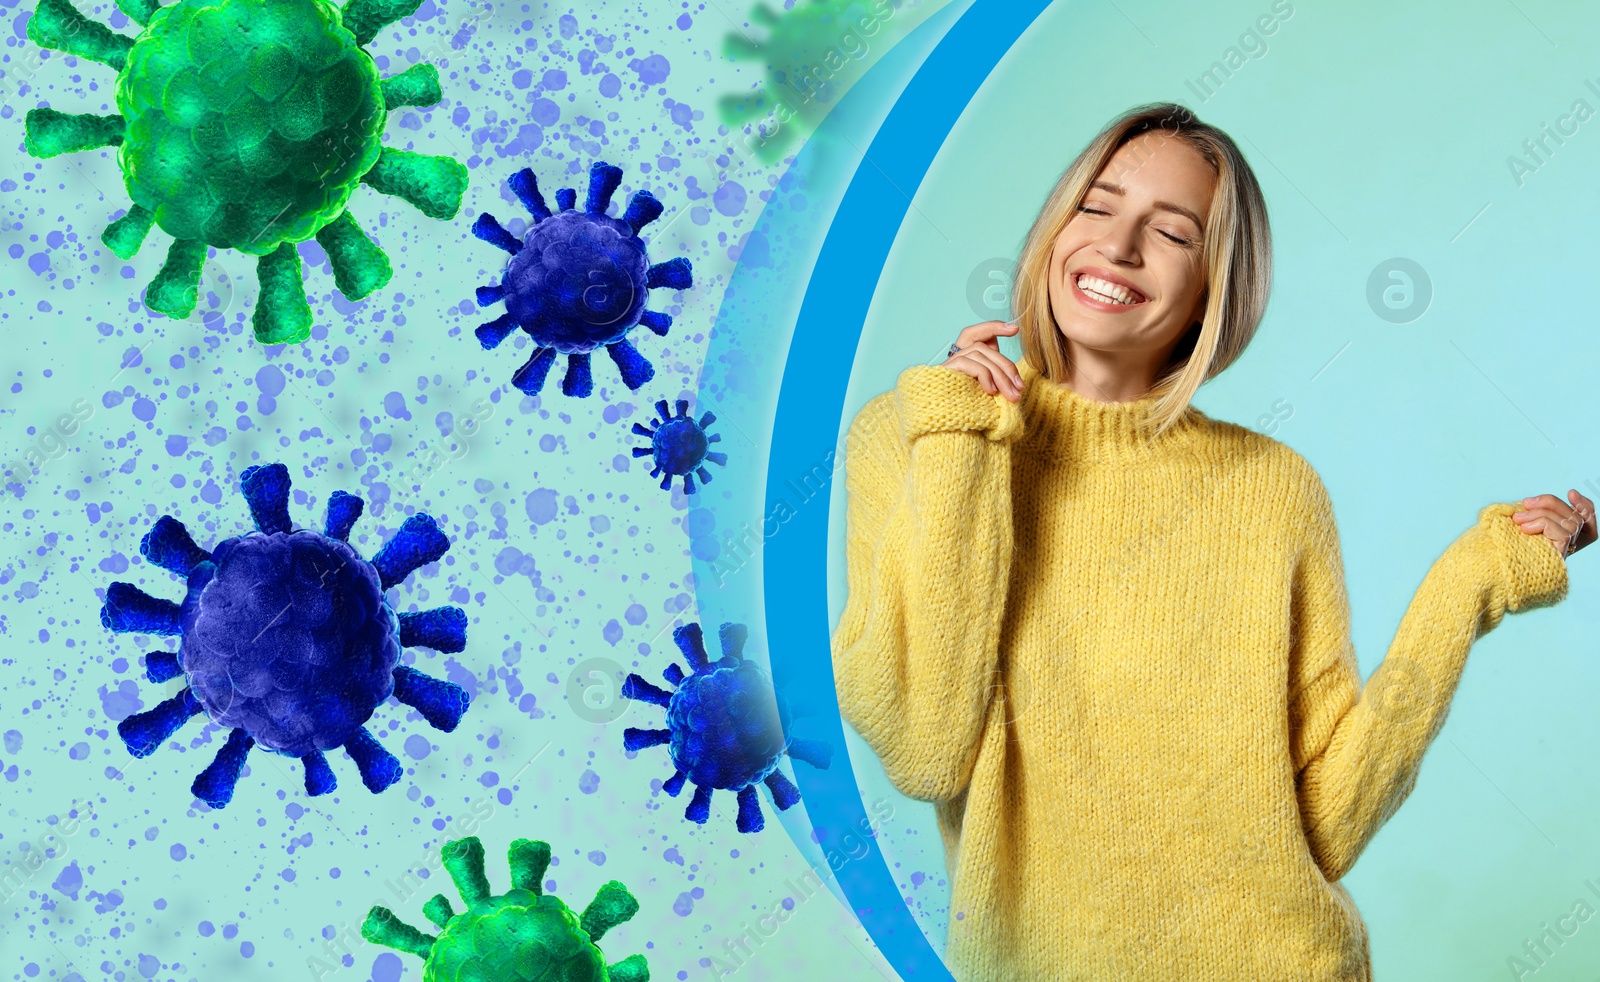 Image of Woman with strong immunity surrounded by viruses on light blue background